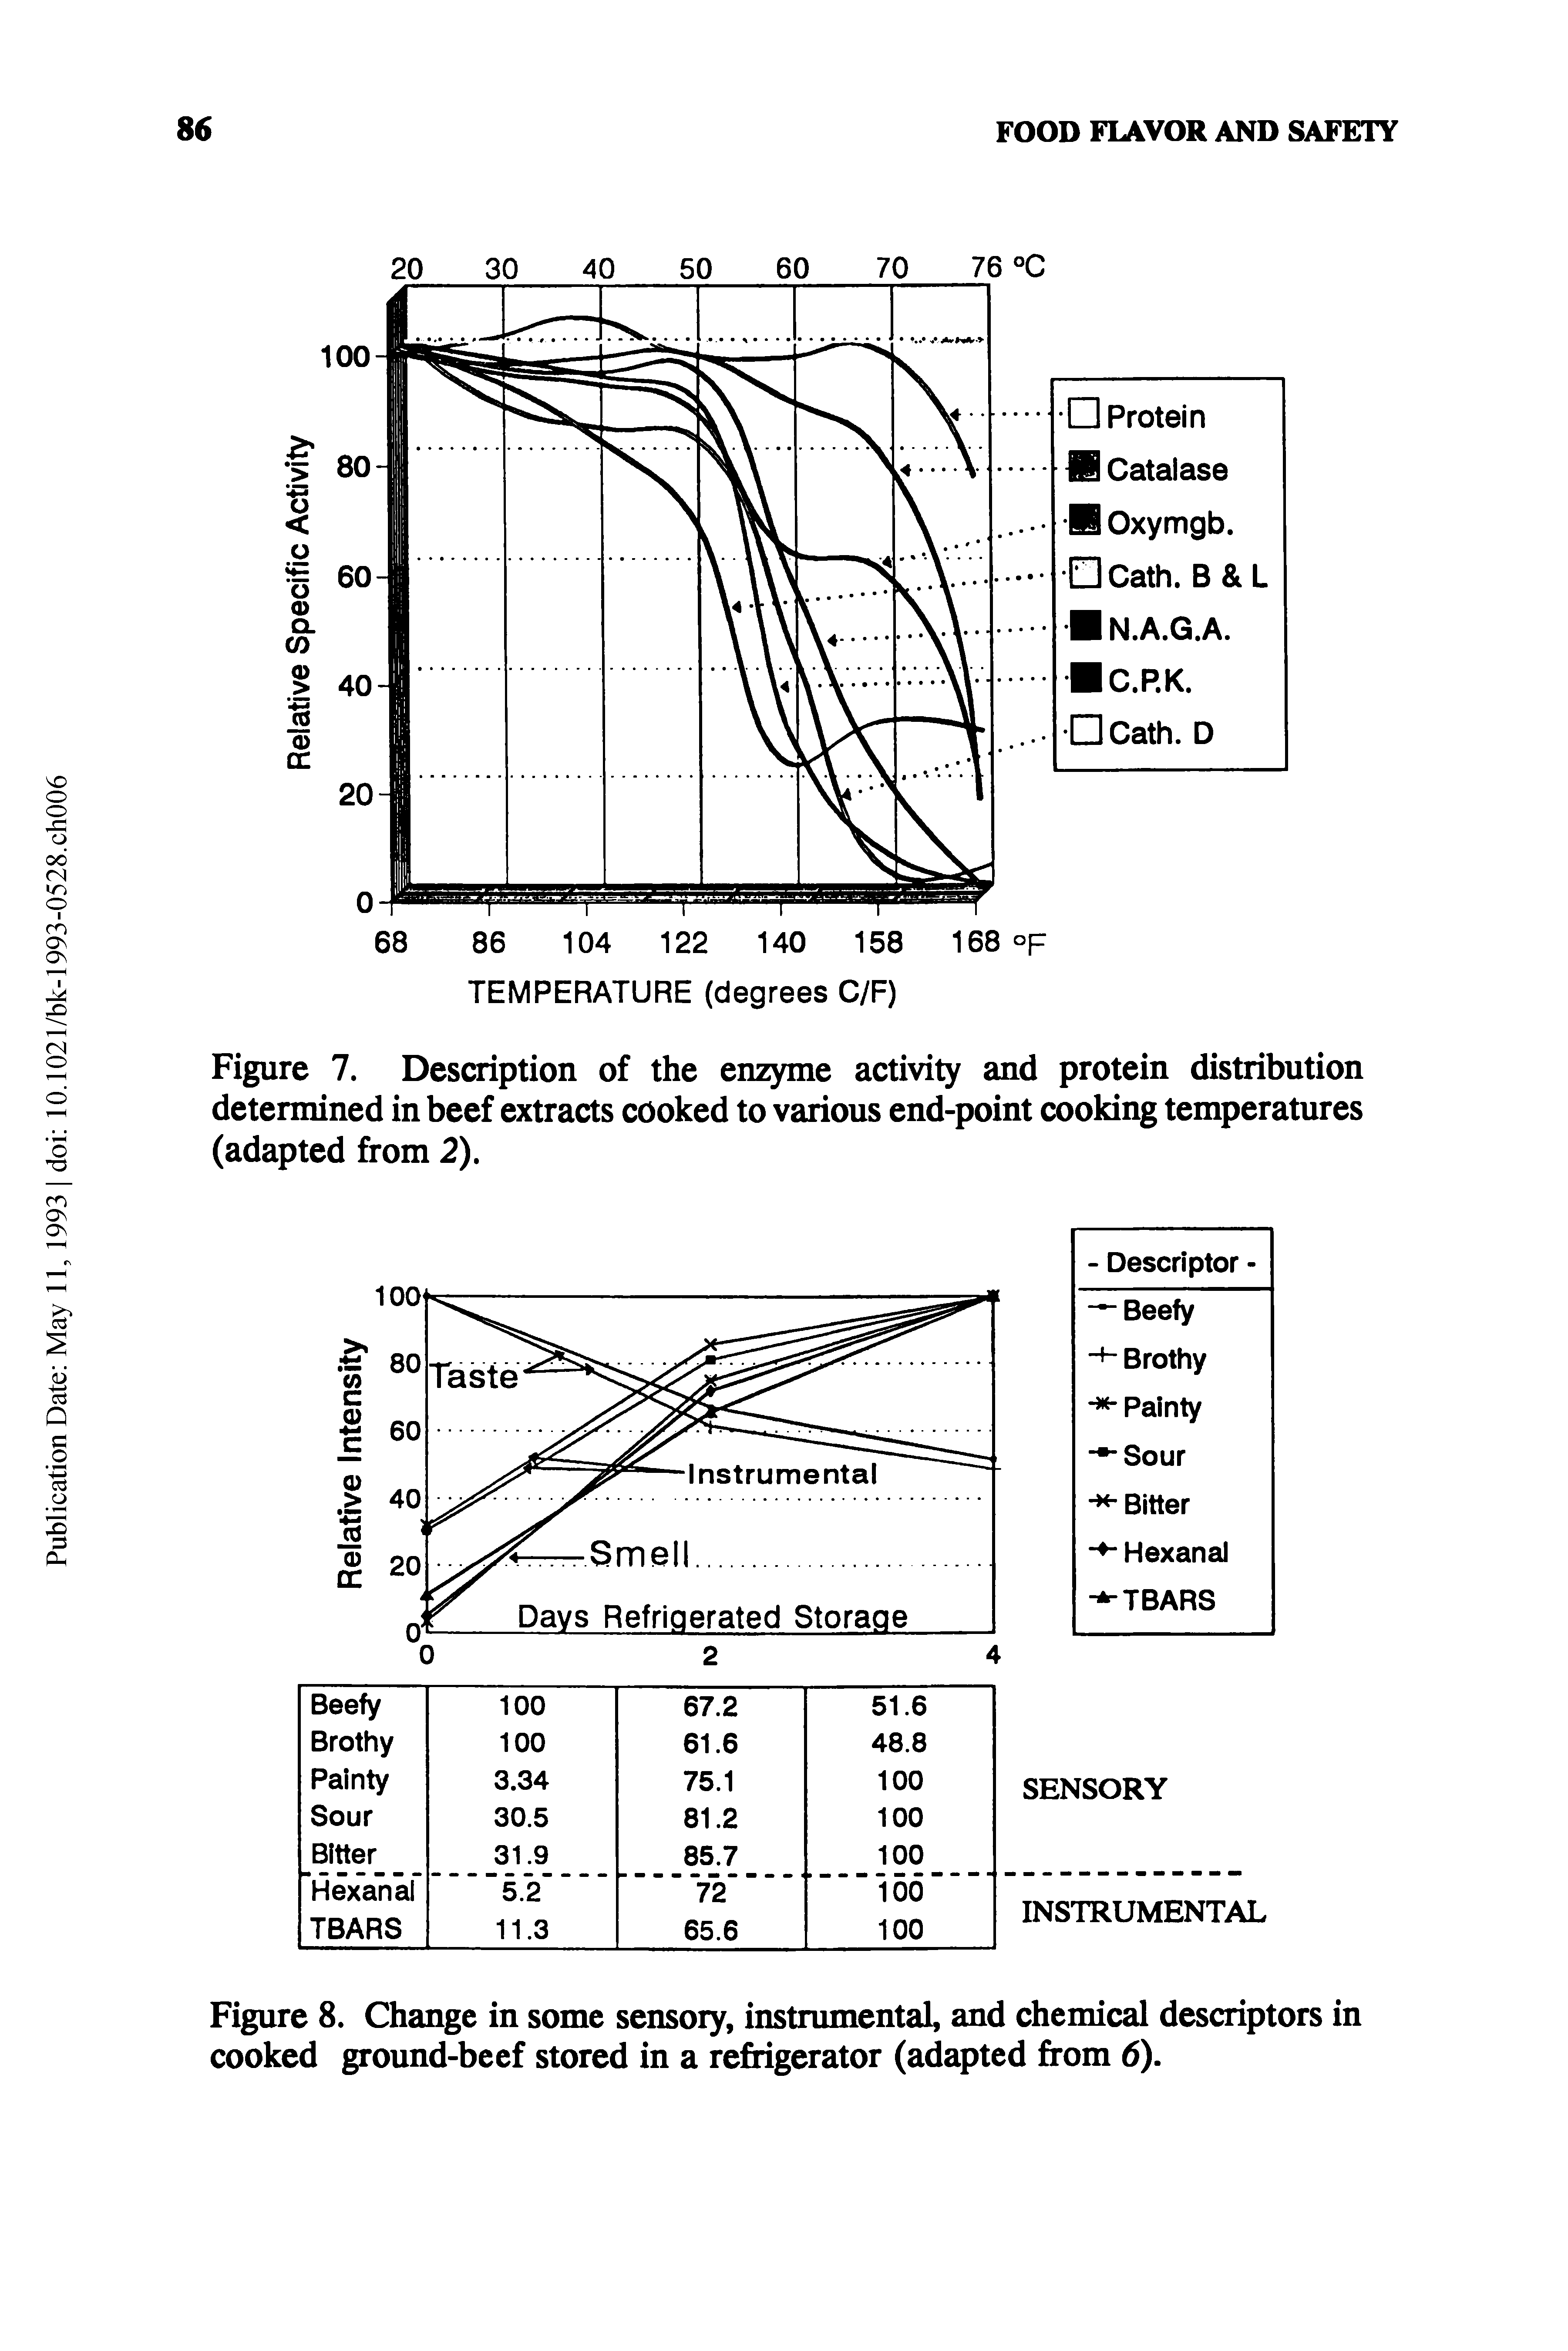 Figure 7. Description of the enzyme activity and protein distribution determined in beef extracts cooked to various end-point cooking temperatures (adapted from 2).